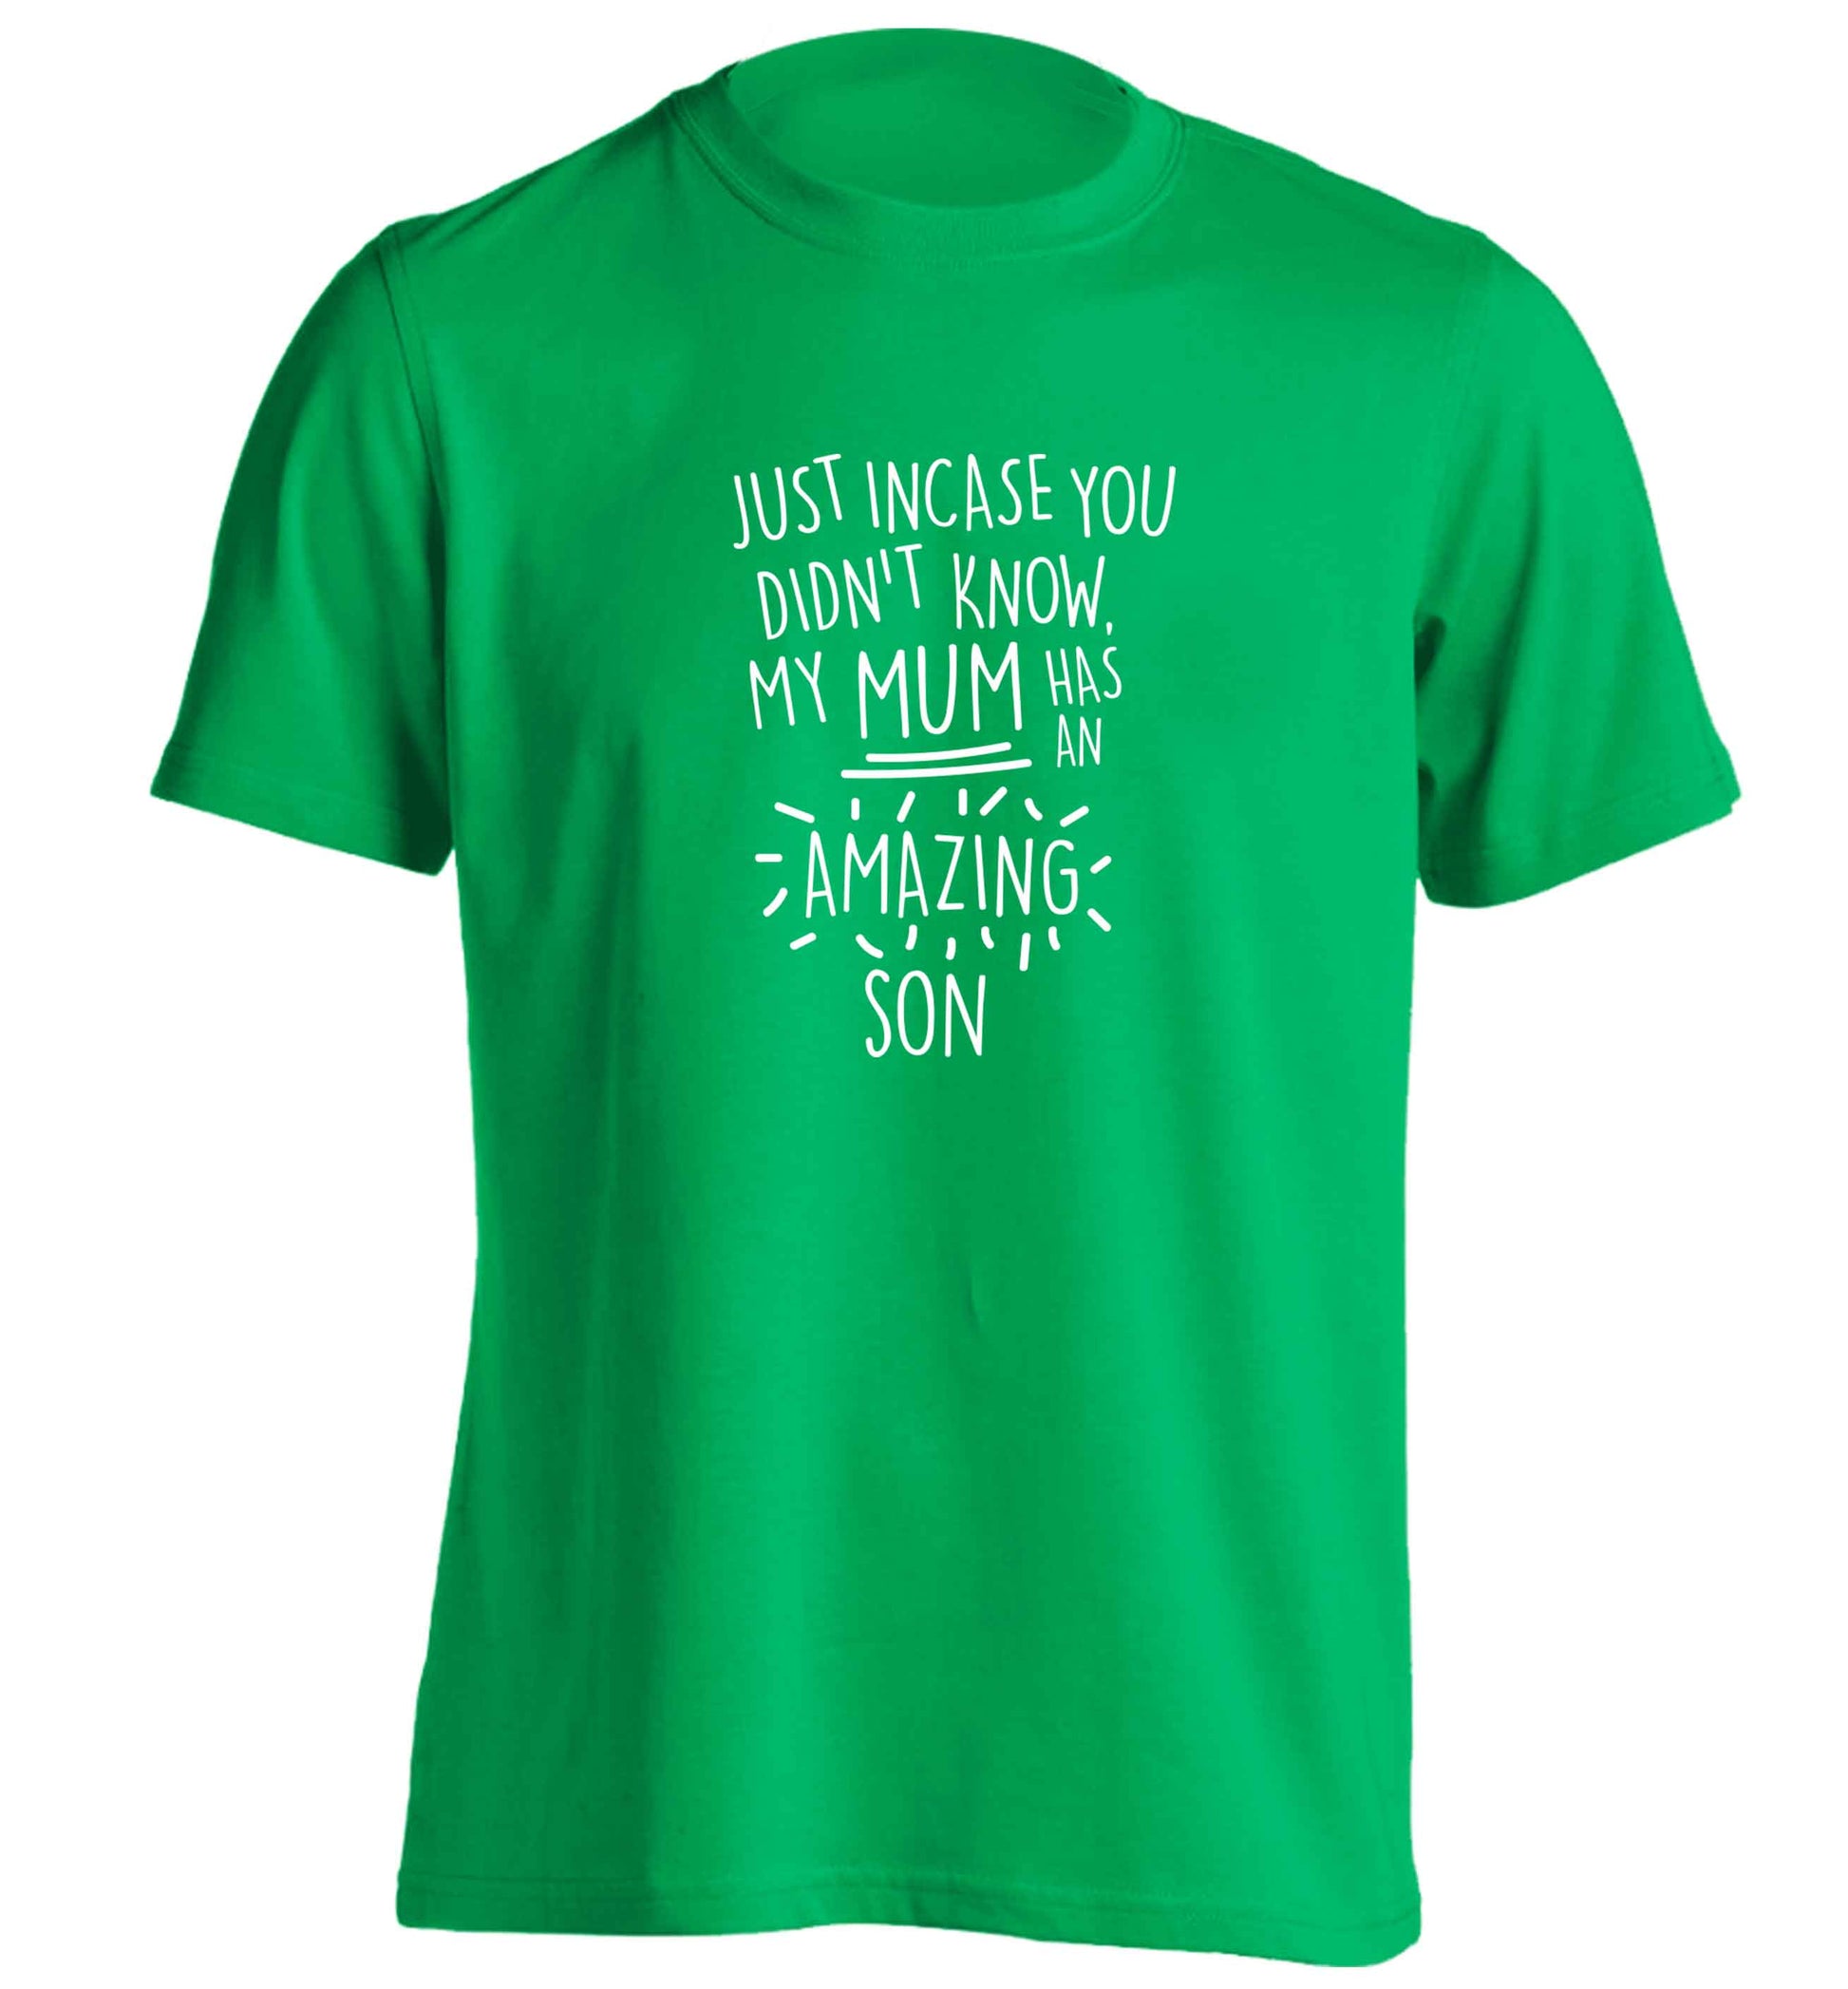 Just incase you didn't know my mum has an amazing son adults unisex green Tshirt 2XL